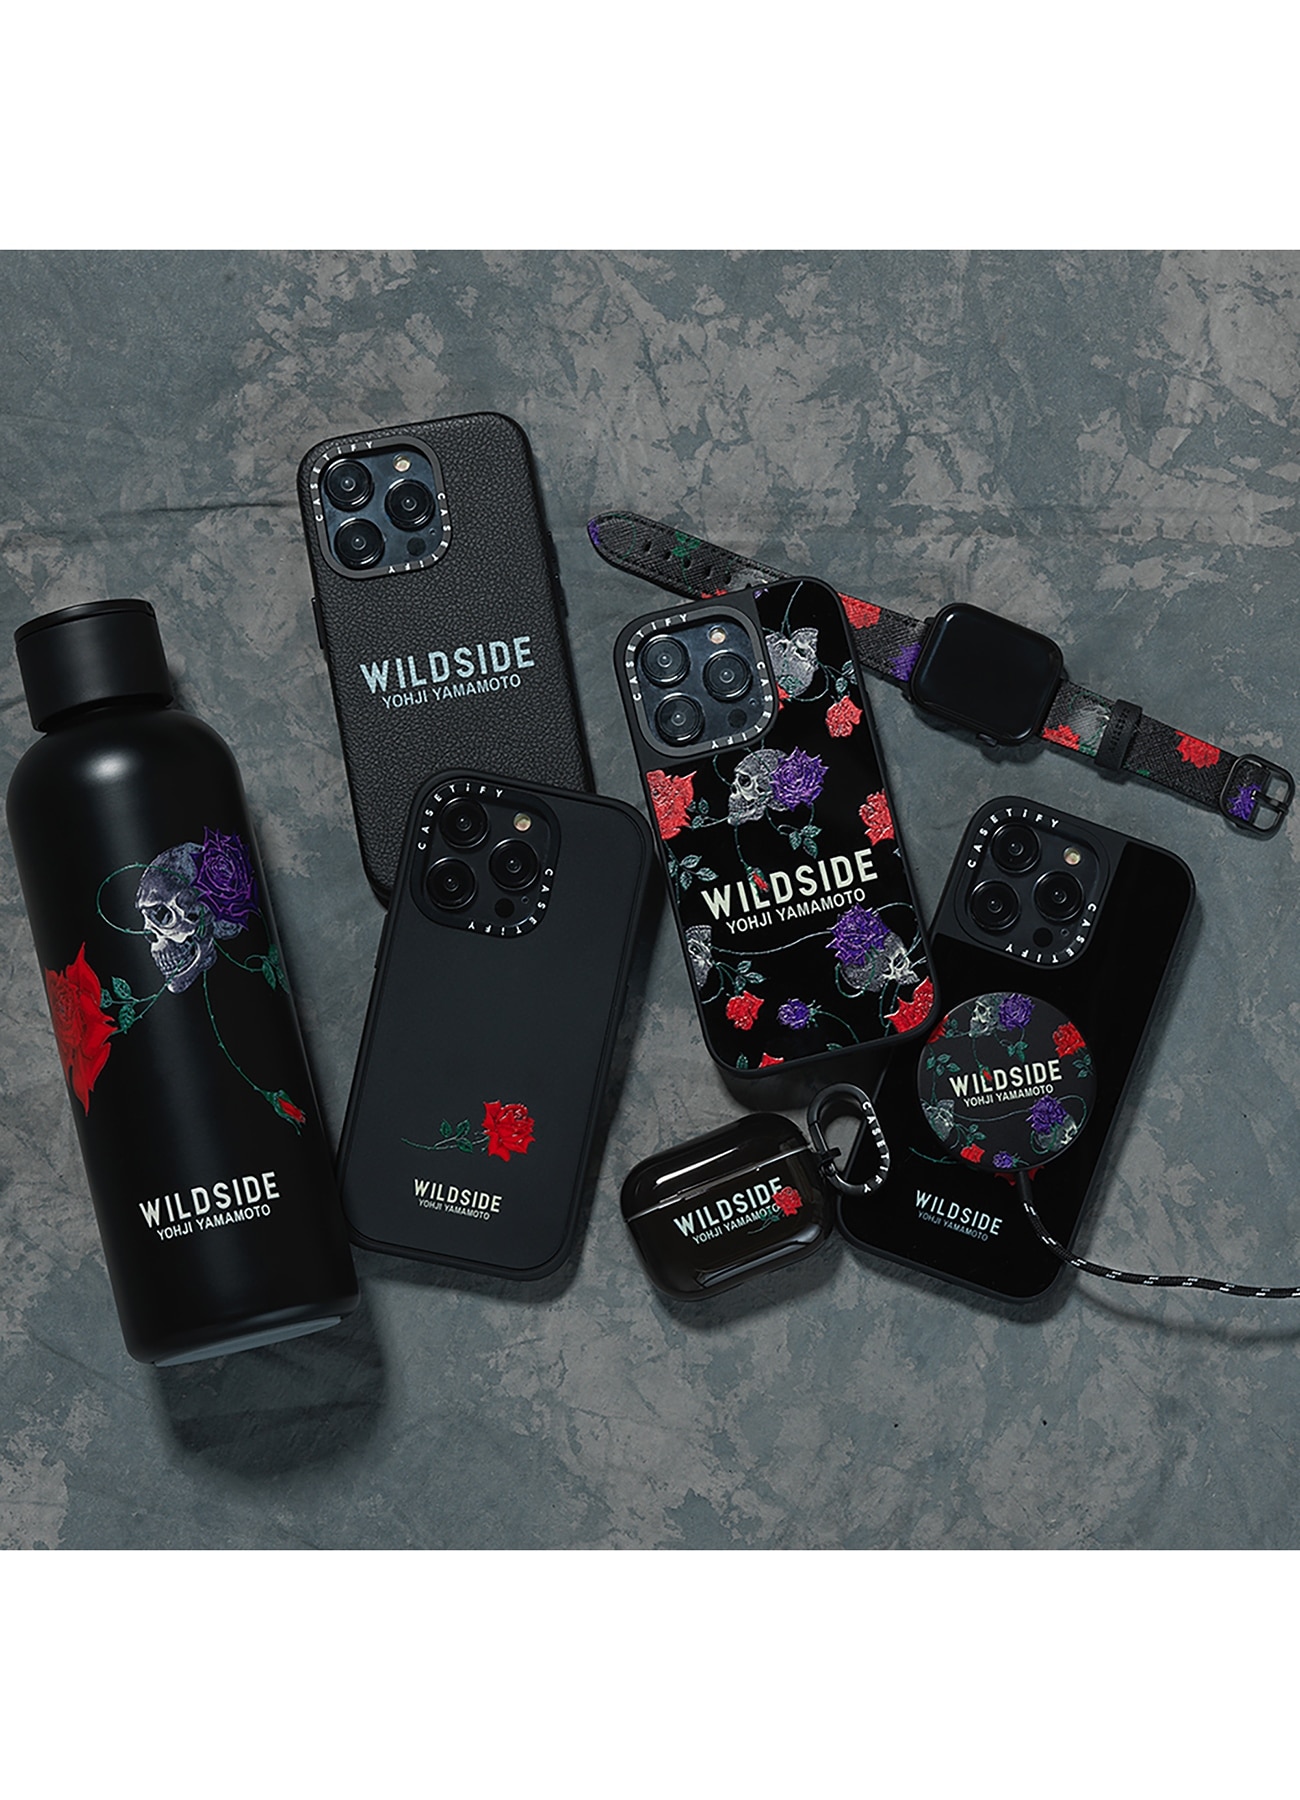 WILDSIDE ×CASETiFY SKULL & ROSE Magsafe Wireless Charger (FREE